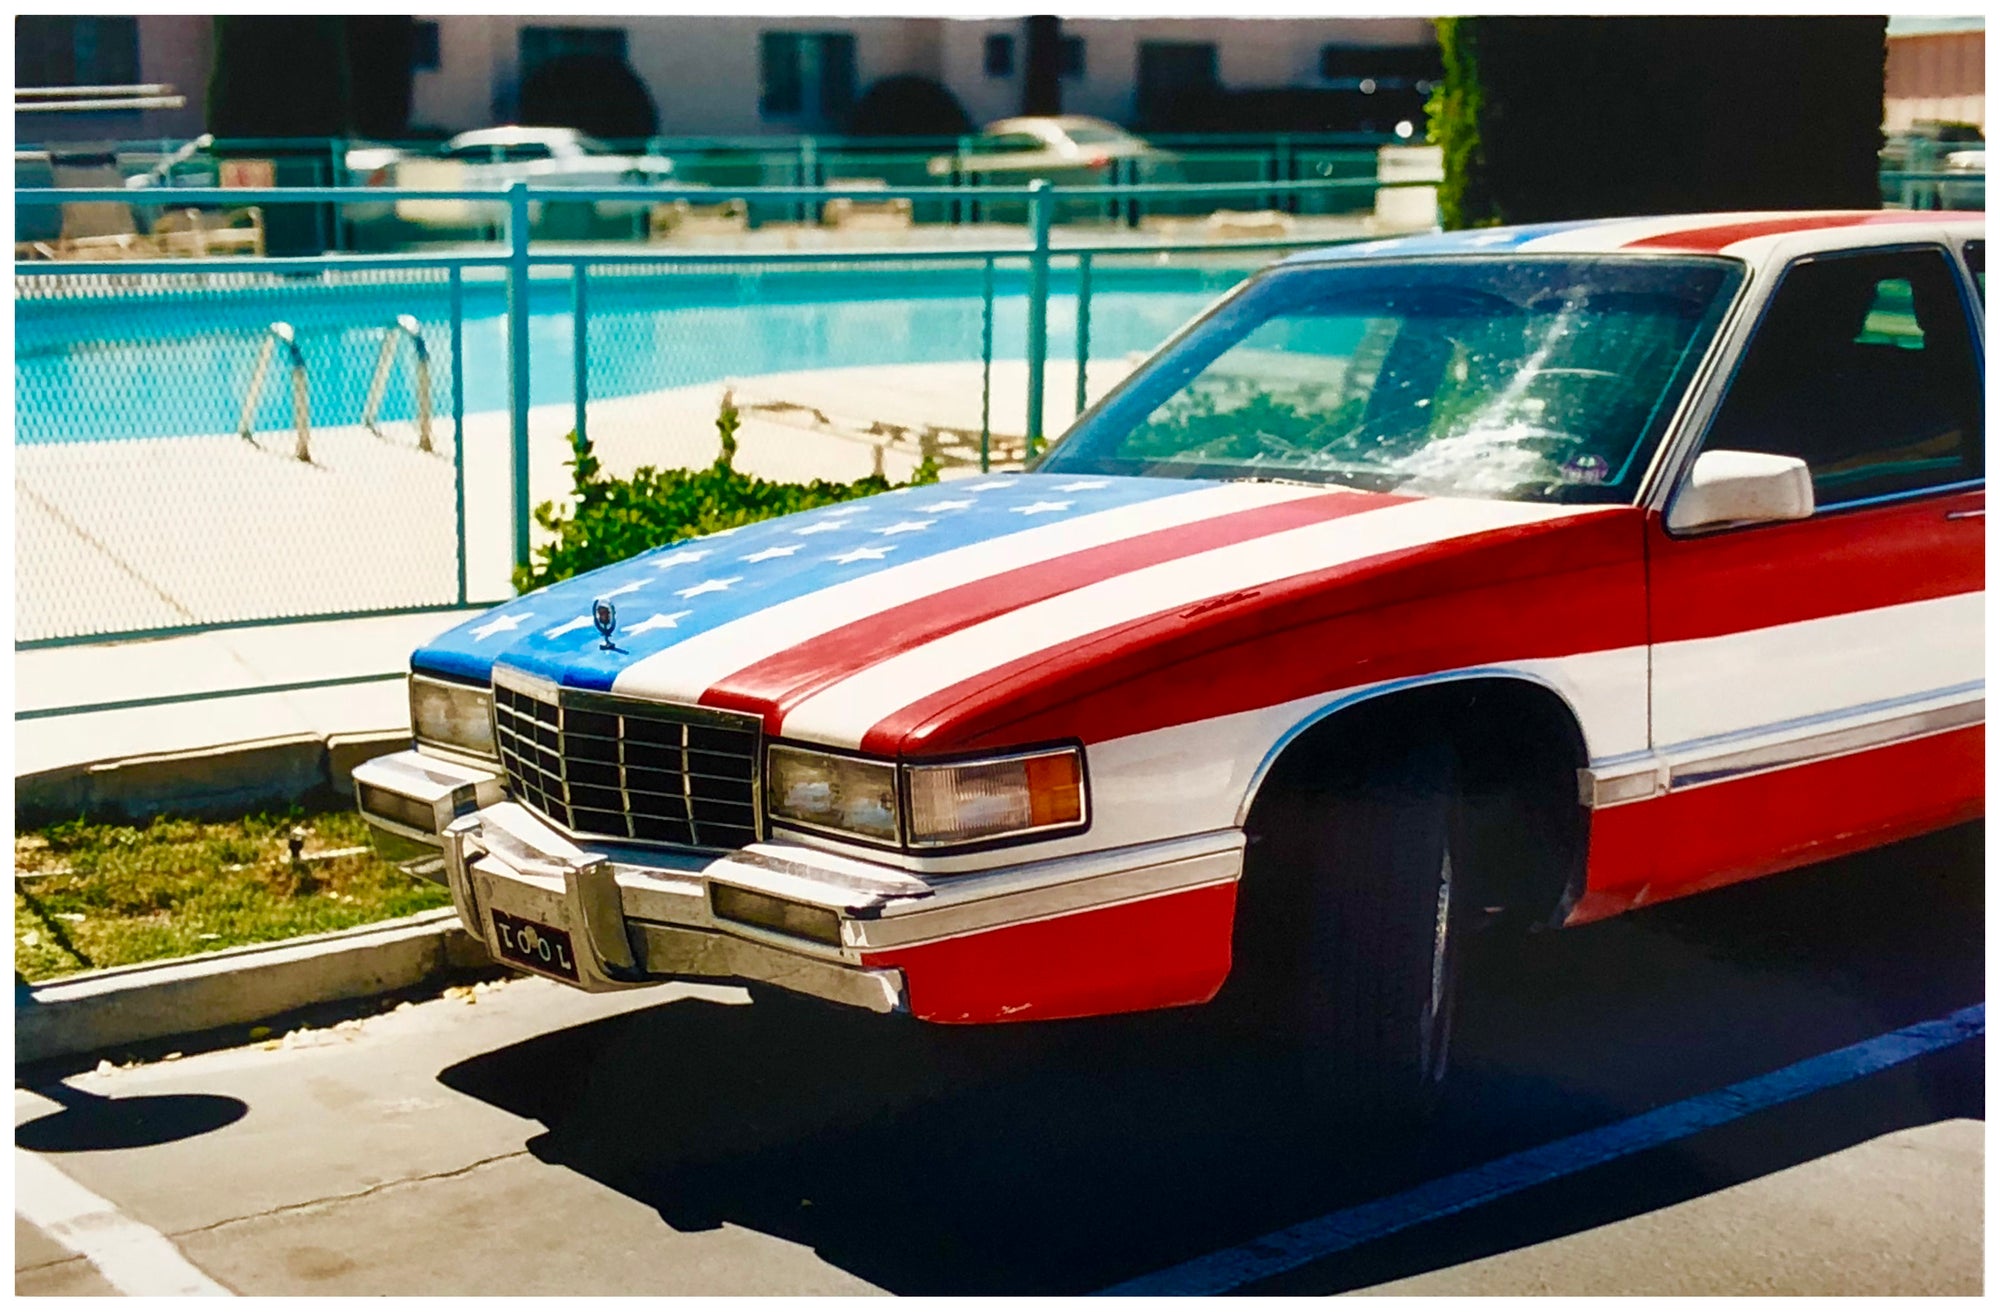 An American flag on a car parked by a pool at the Algiers Hotel in Las Vegas.